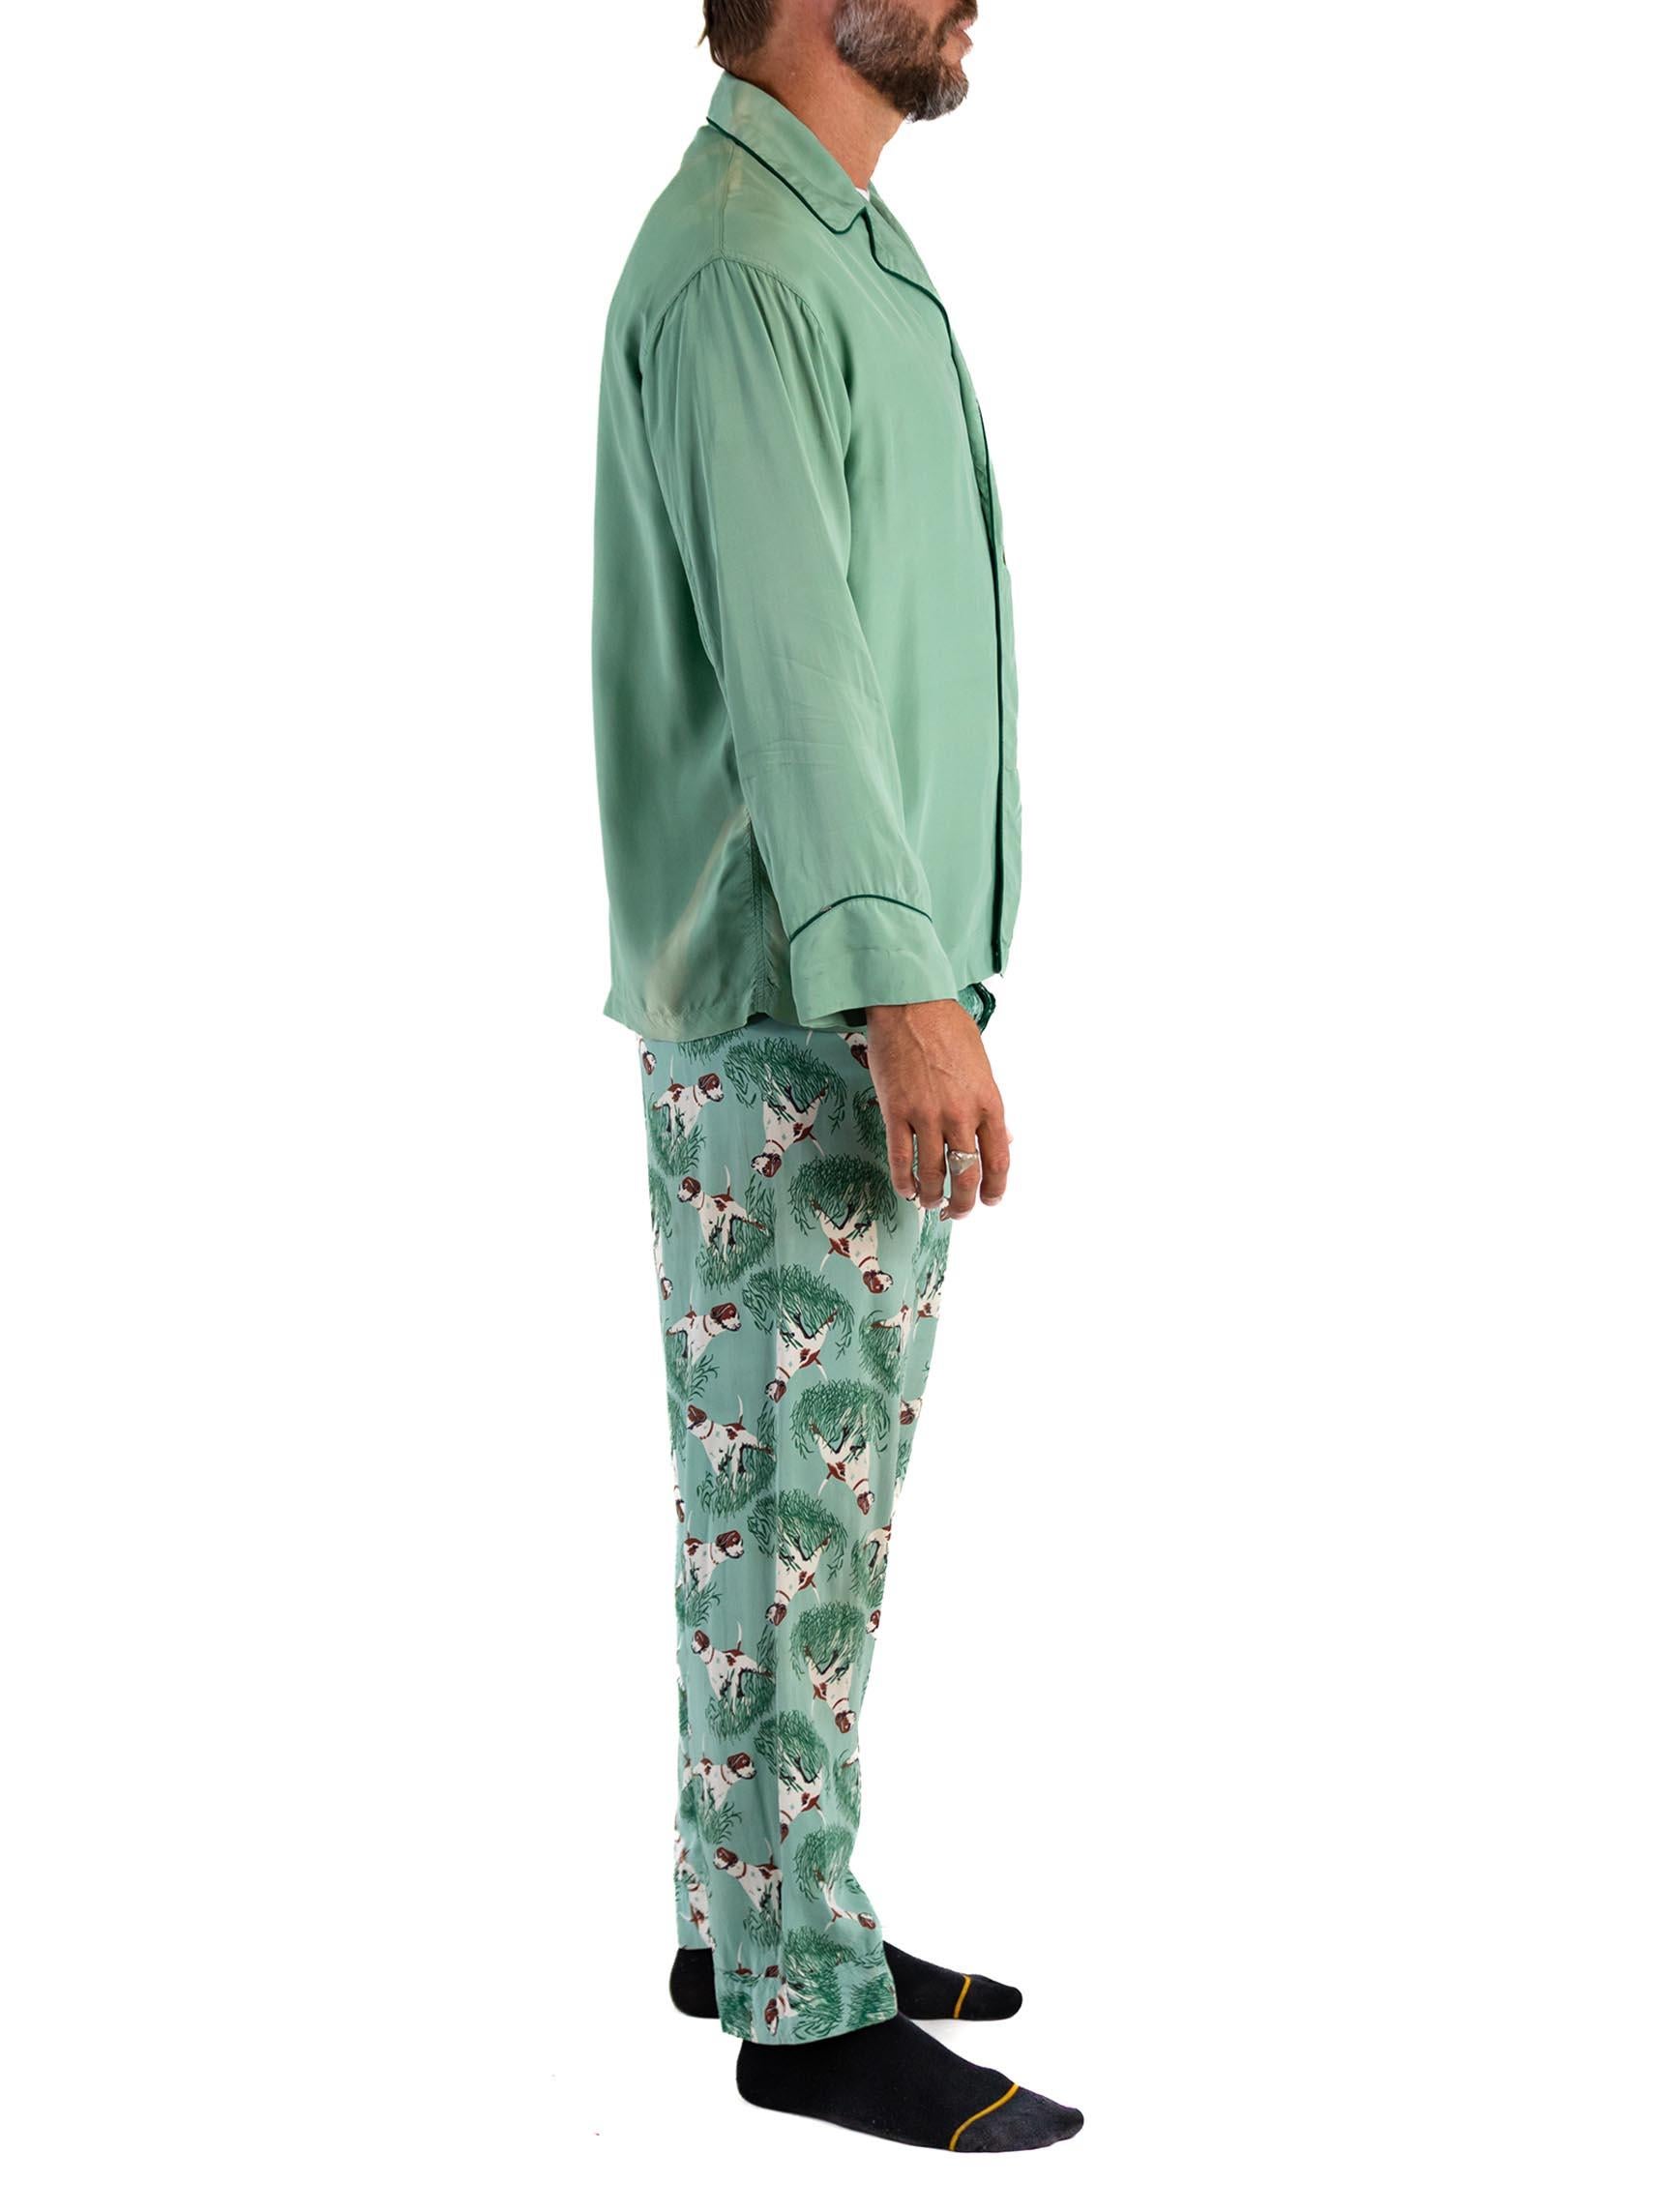 1940S Teal Rayon Solid Top And Hunting Dog Pants Pajamas Set In Excellent Condition For Sale In New York, NY